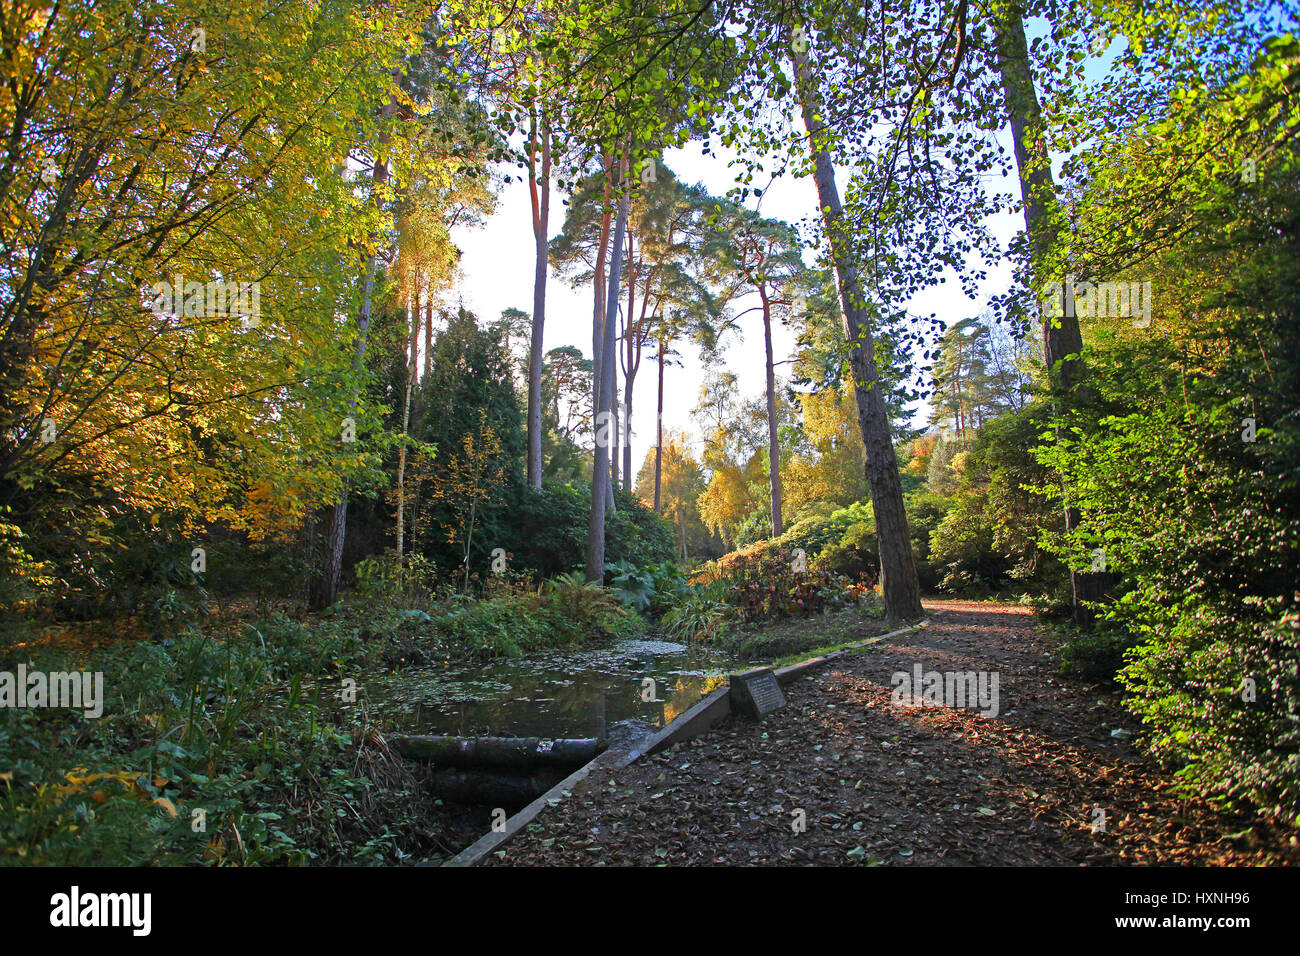 Peace Garden and Autumn Colour, Tilgate Park and Forest, Crawley, West Sussex. UK Stock Photo